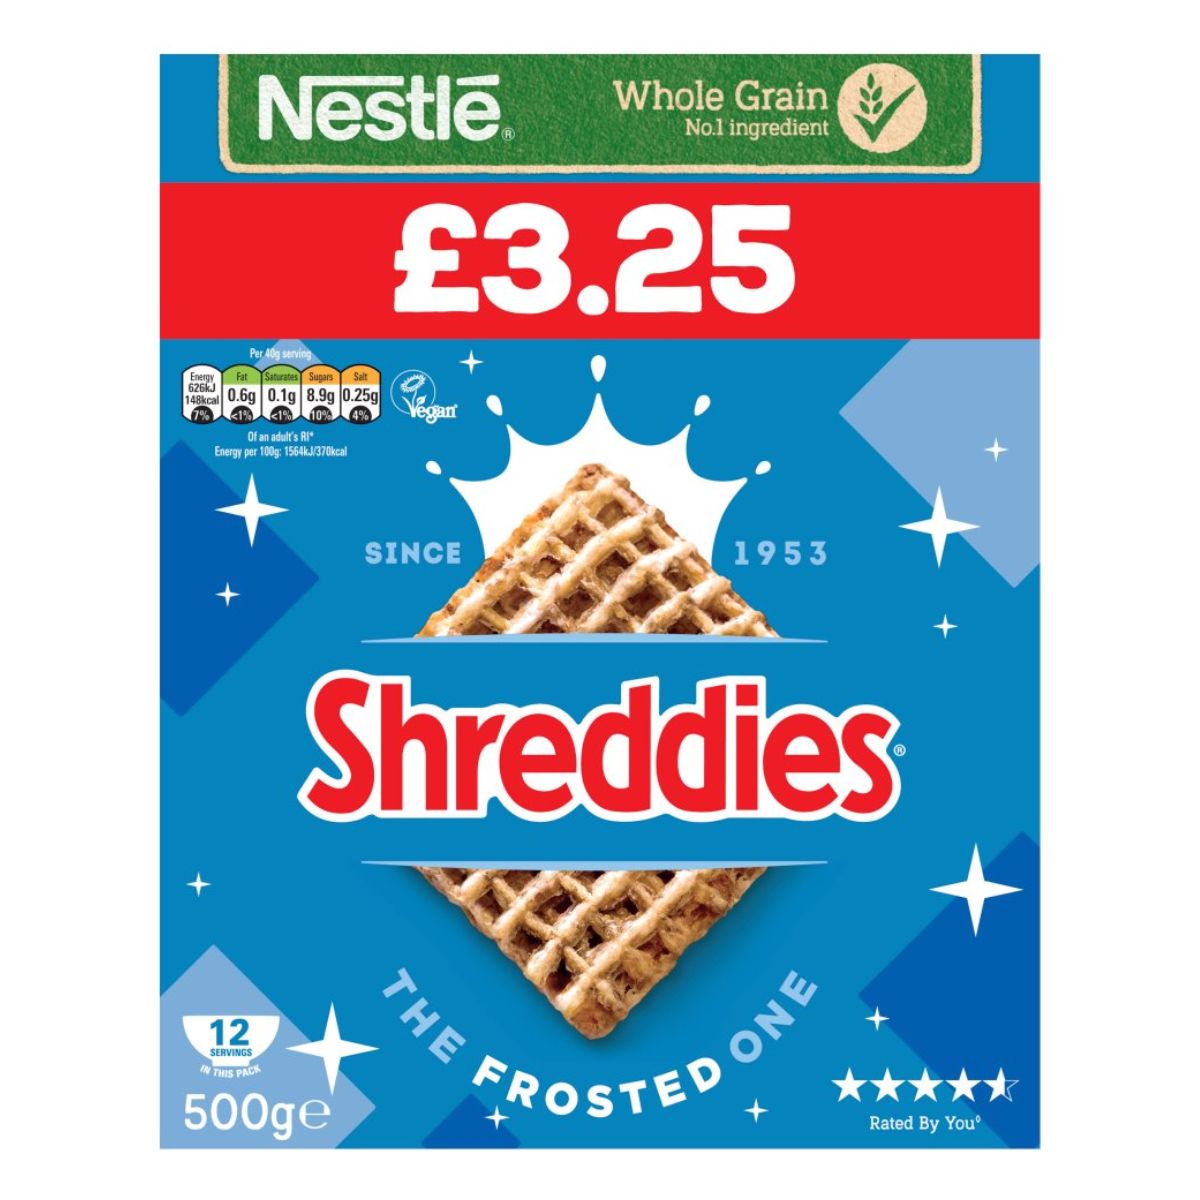 Nestle - Shreddies The Frosted One - 500g is the product being referred to.